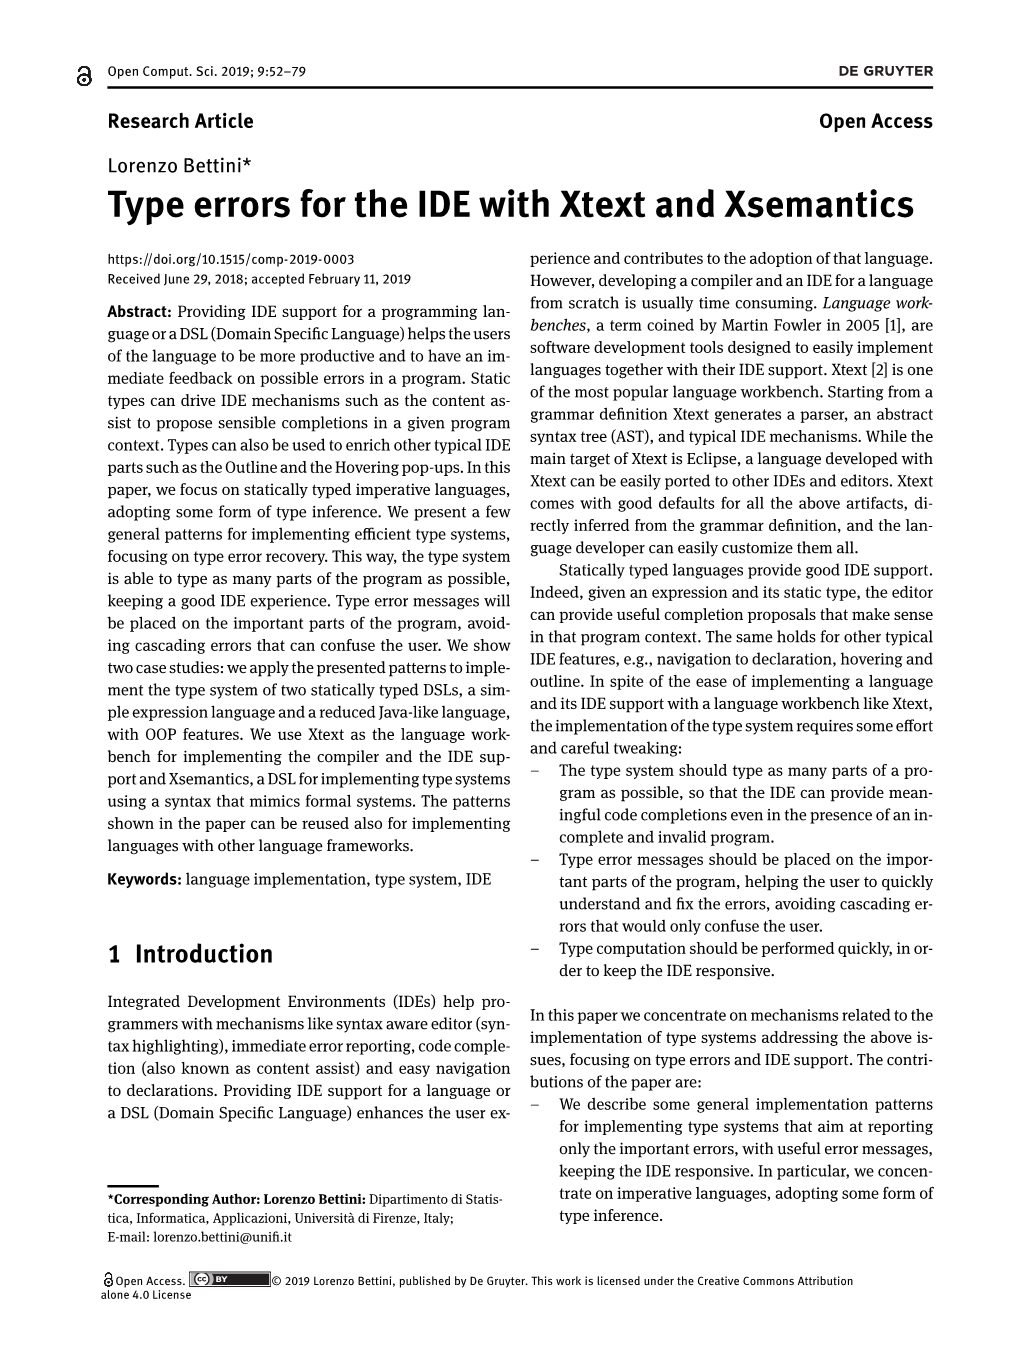 Type Errors for the IDE with Xtext and Xsemantics Perience and Contributes to the Adoption of That Language